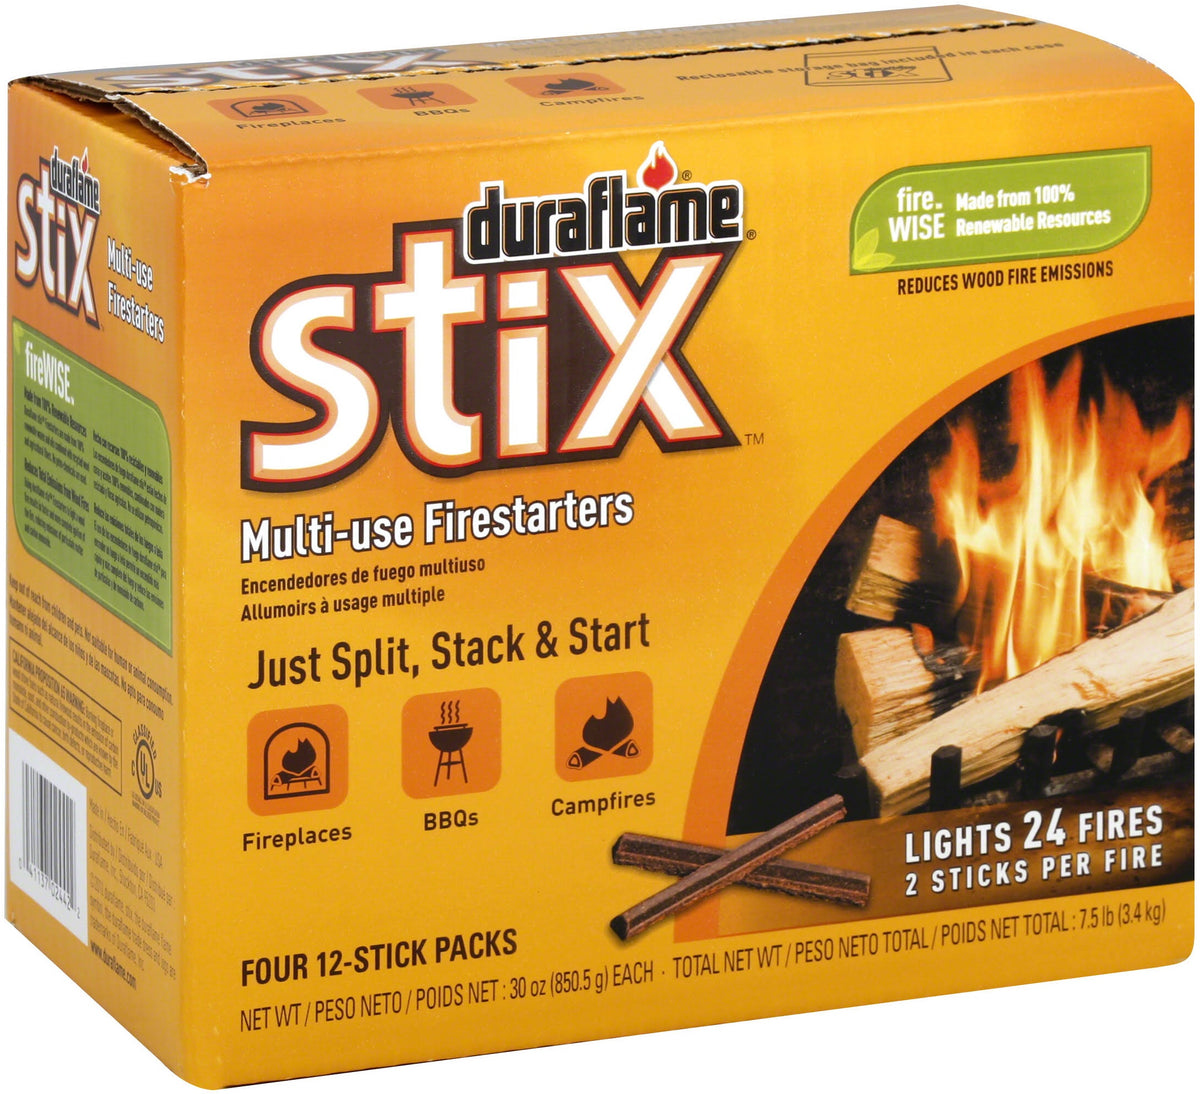 Buy duraflame stix - Online store for fireplace & accessories, firelogs & fire starters in USA, on sale, low price, discount deals, coupon code